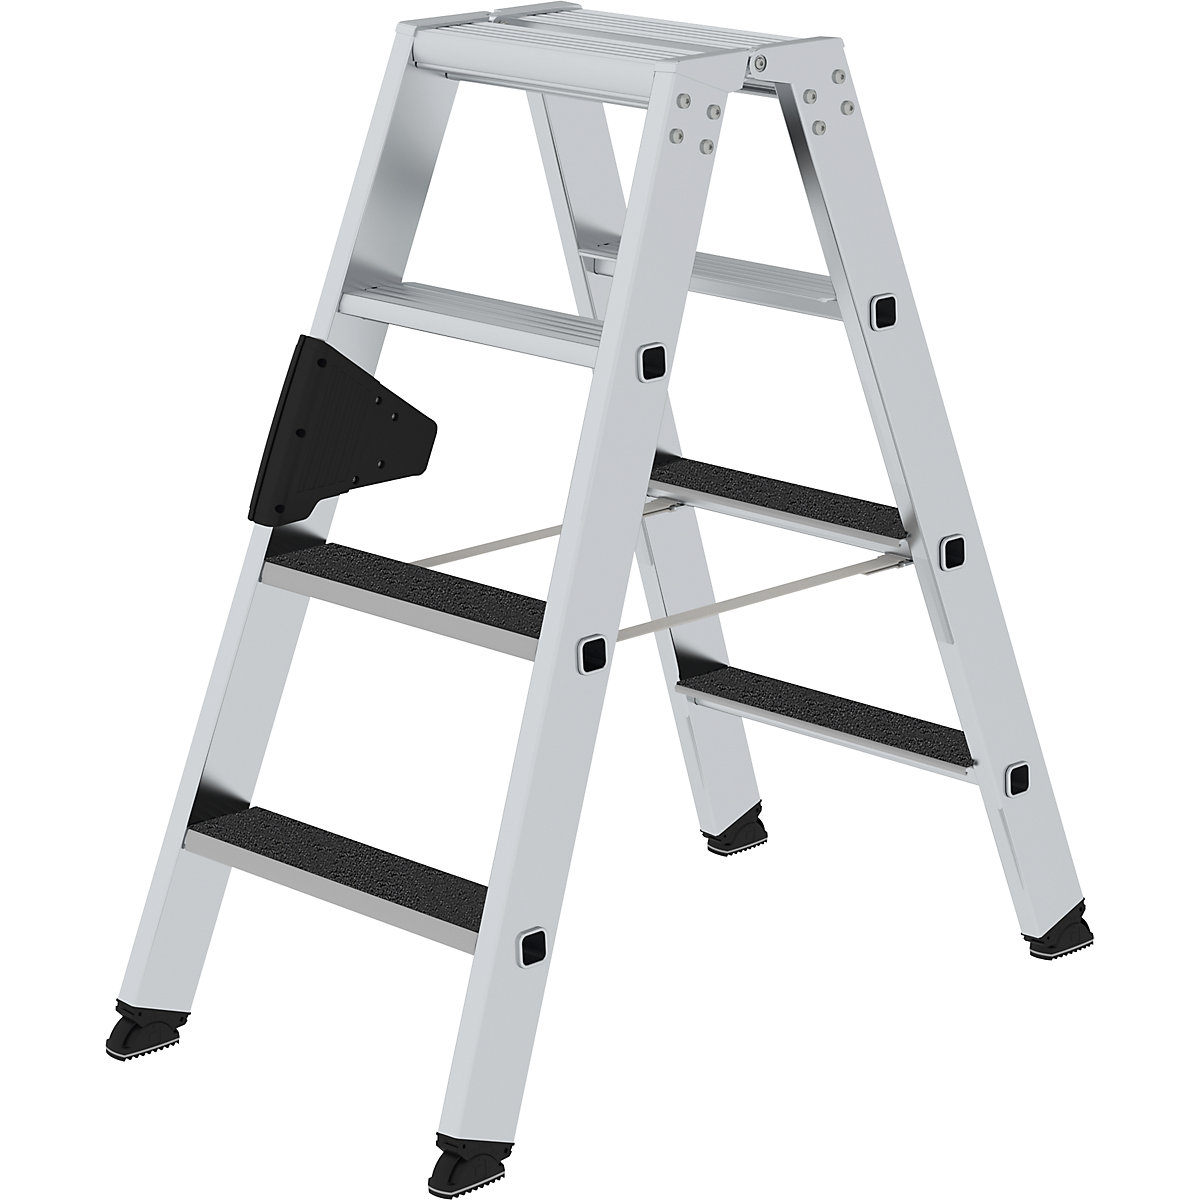 CLIP-STEP step ladder – MUNK, double sided access, slip resistant R13, 2 x 4 steps-13